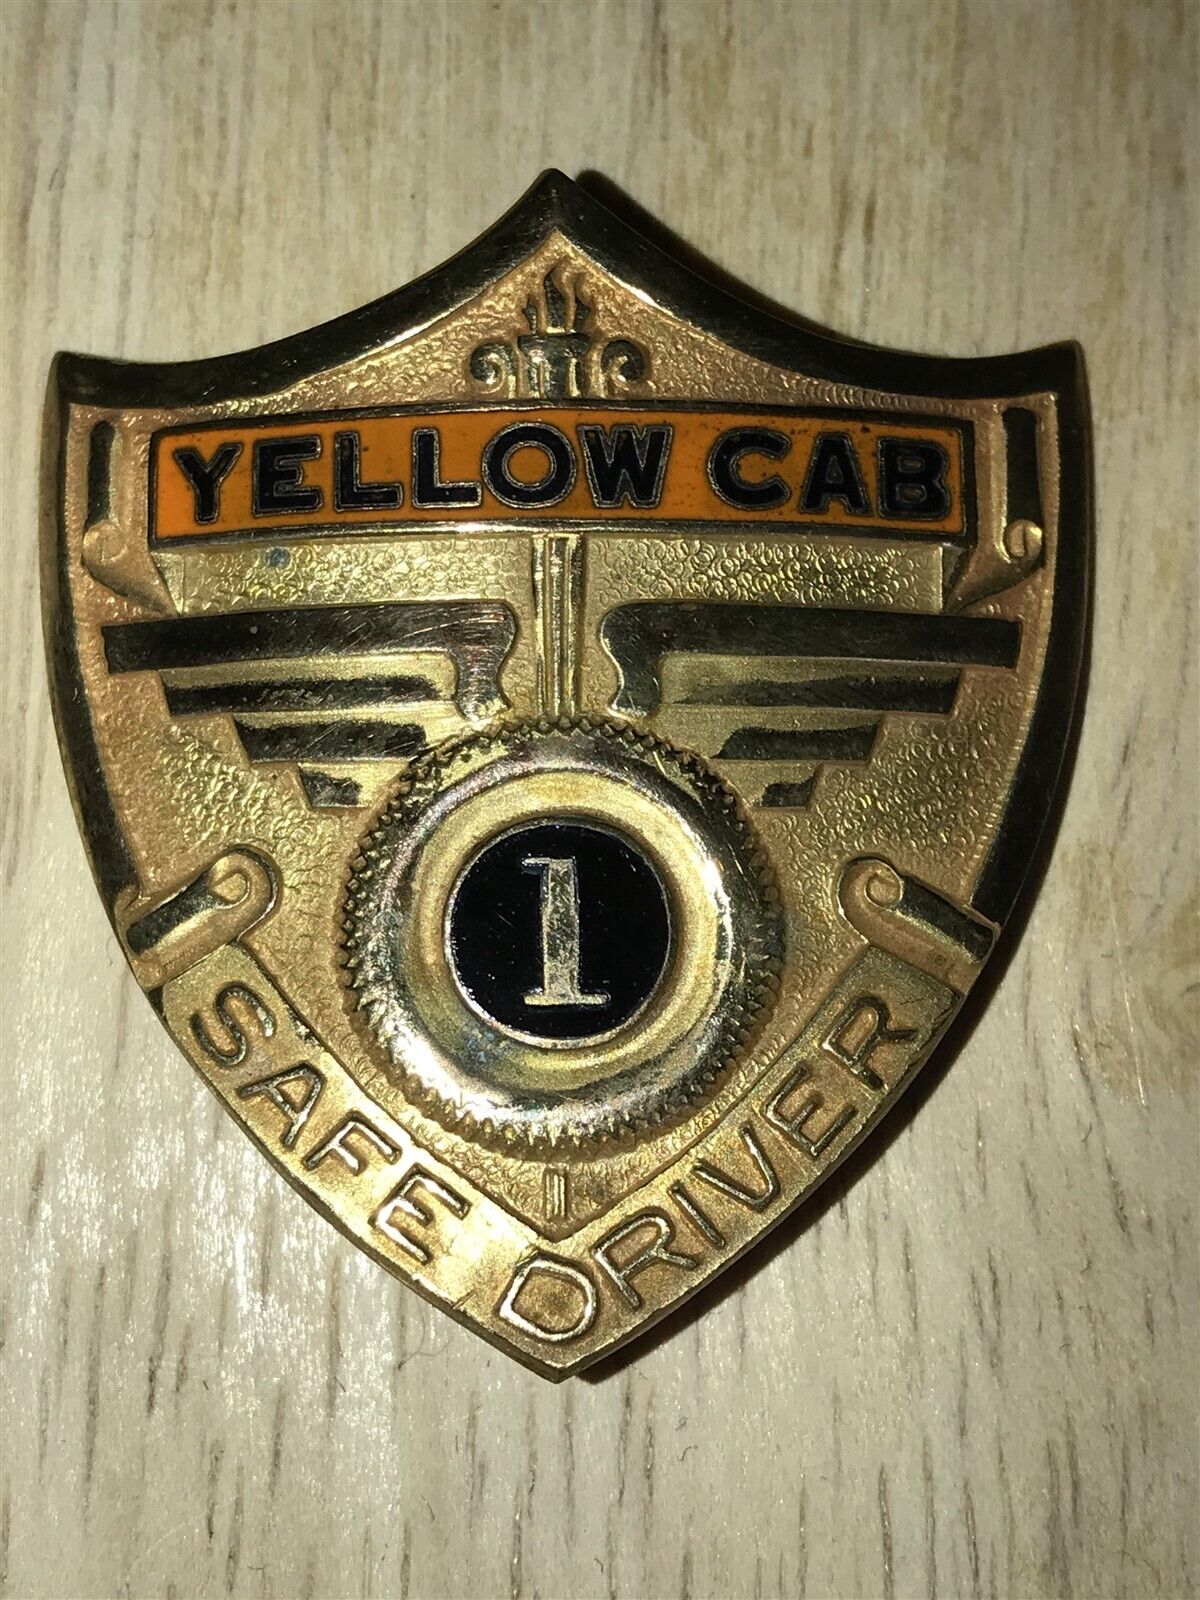 VINTAGE CHICAGO YELLOW CAB 1 YEAR SAFE DRIVER AWARD PIN UNIFORM BADGE 1920s TAXI